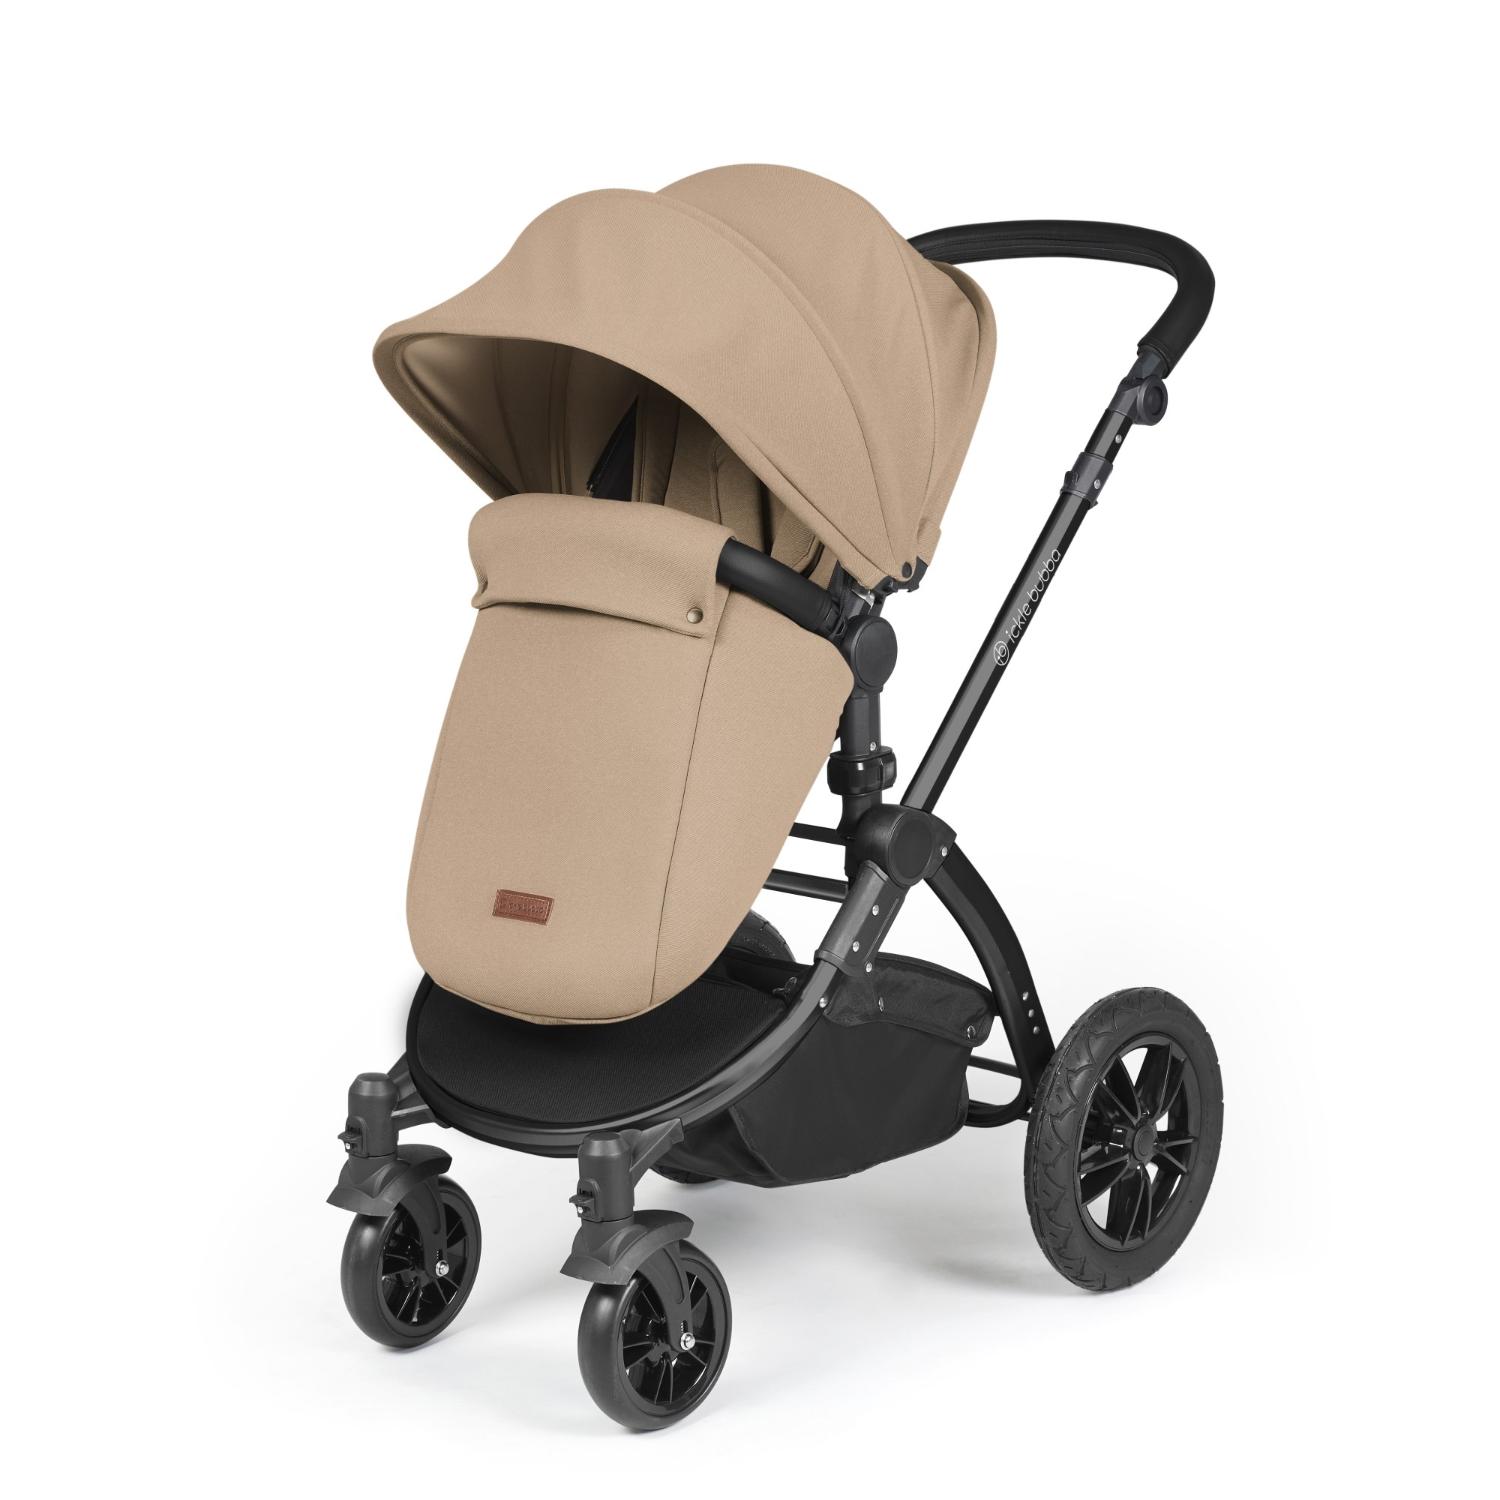 Ickle Bubba Stomp Luxe Pushchair with foot warmer attached in Desert beige colour